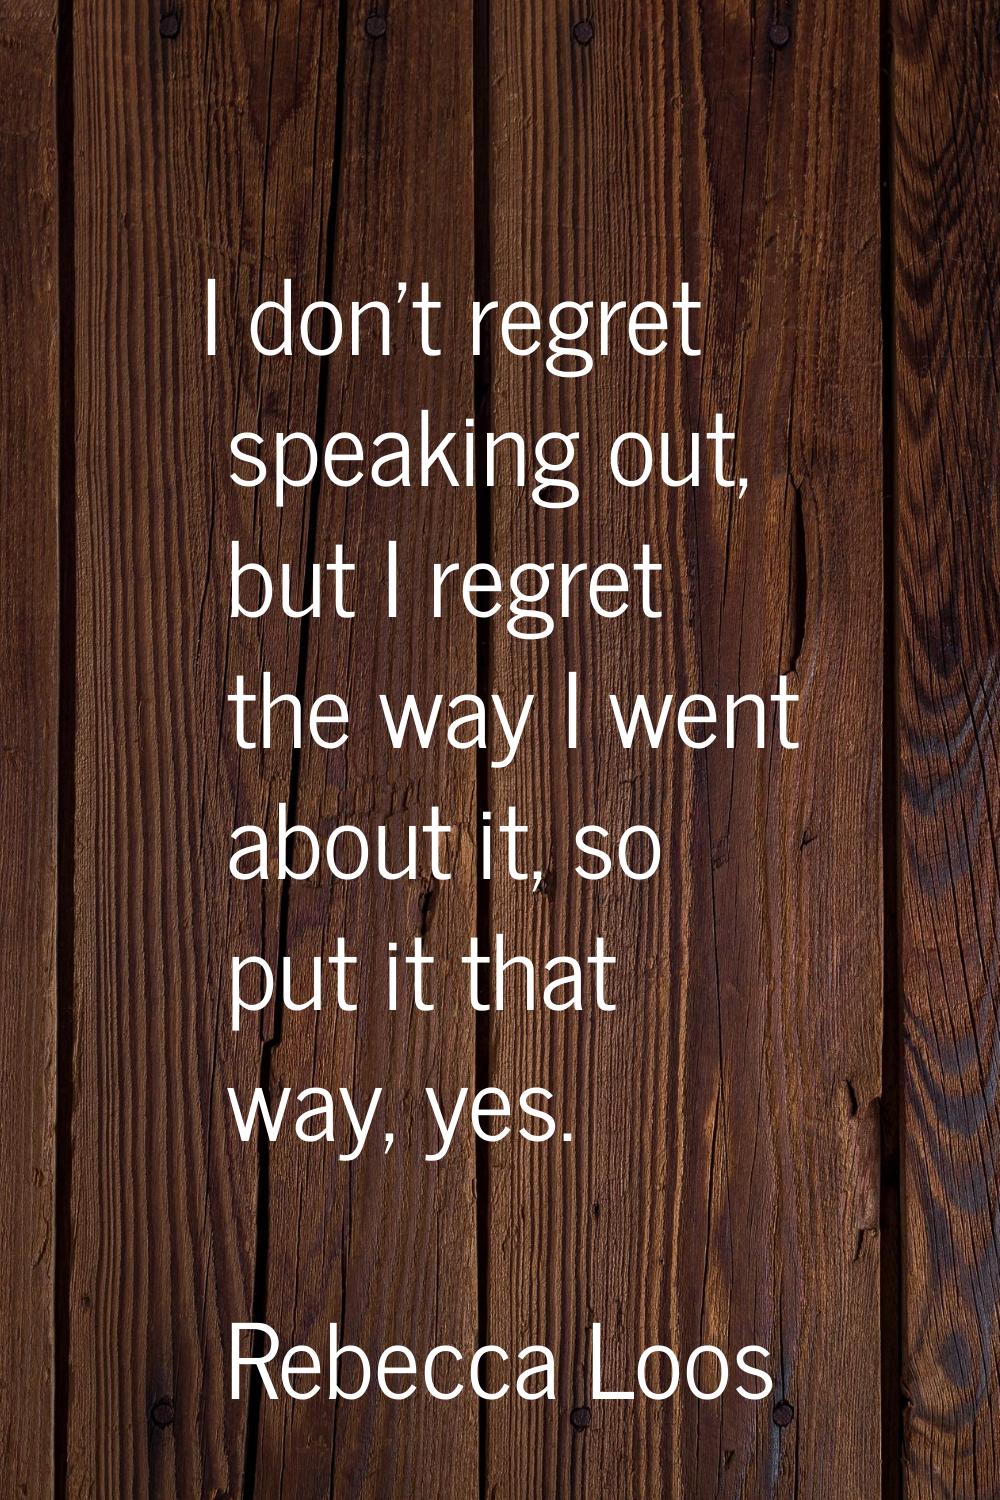 I don't regret speaking out, but I regret the way I went about it, so put it that way, yes.